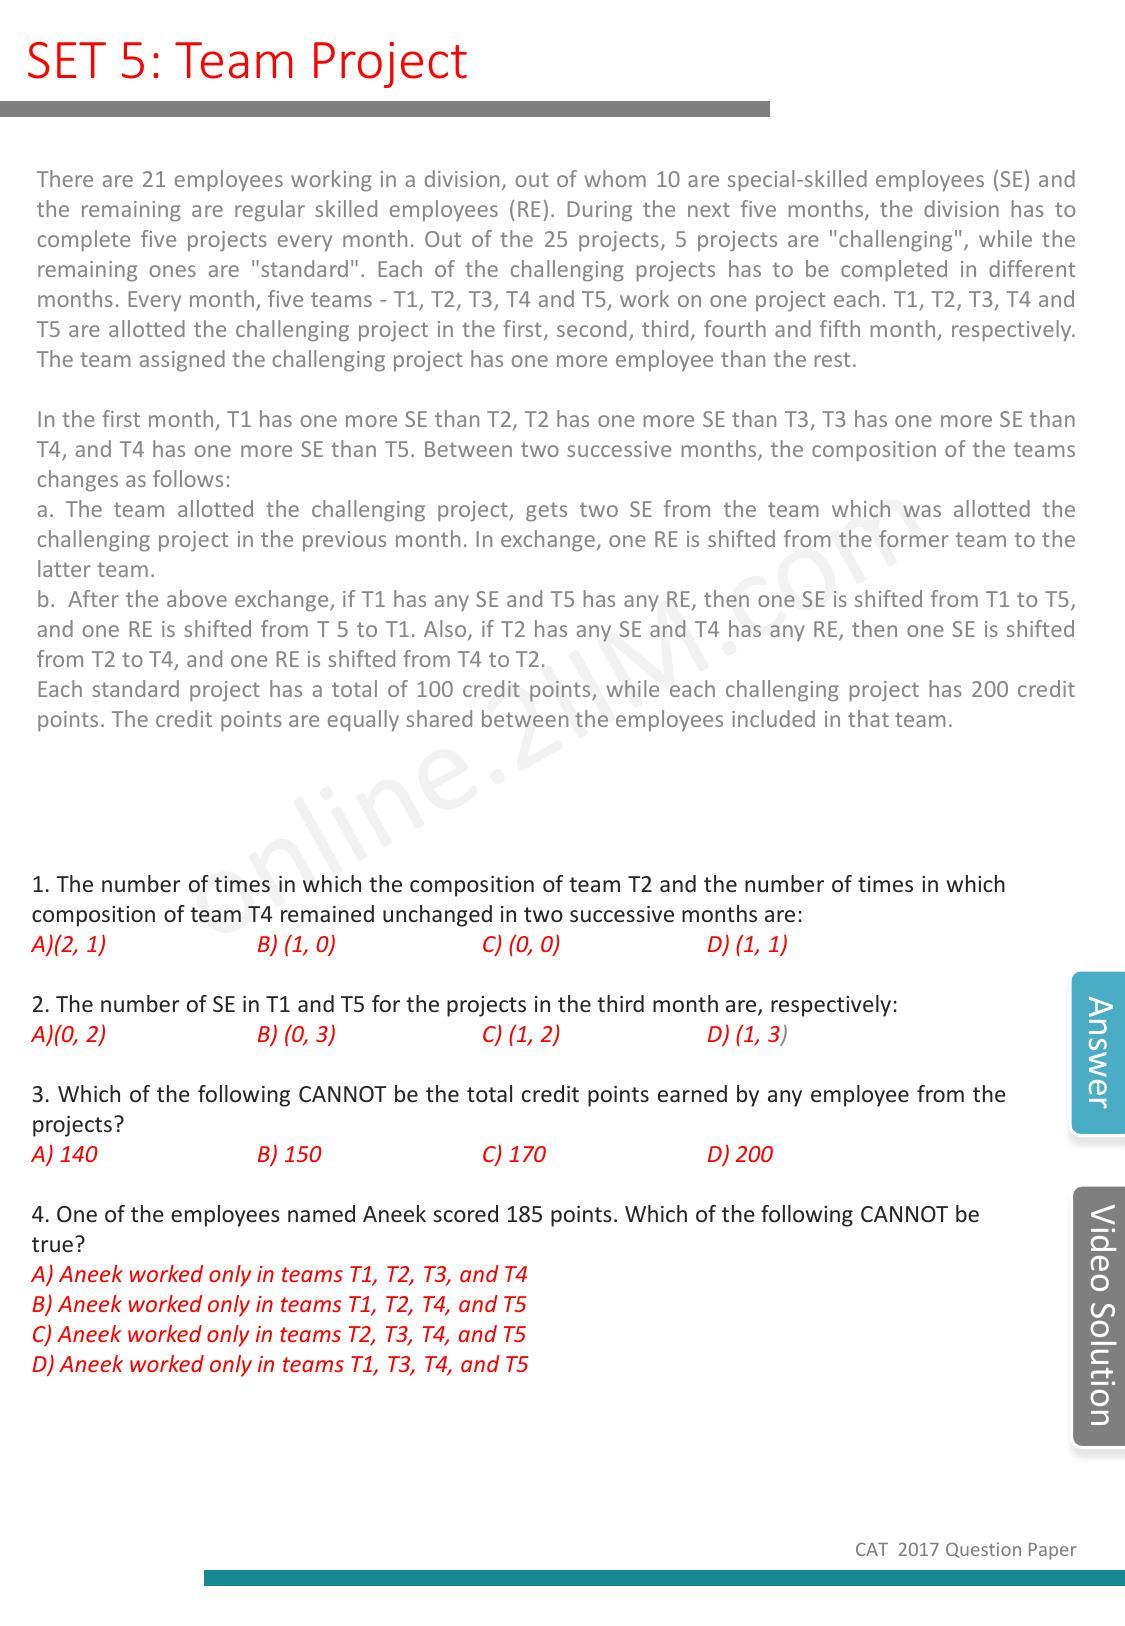 CAT 2017 CAT DILR Slot 1 Question Paper - Page 6